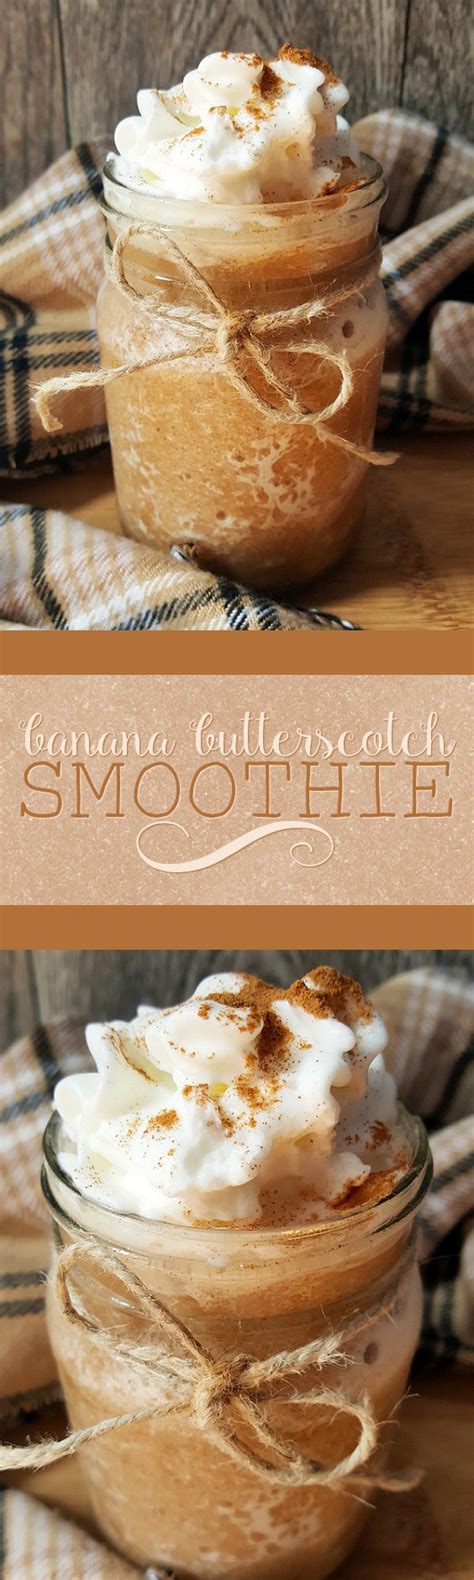 Smoothies can be a delicious source of vitamins, minerals, and other nutrients. Banana Butterscotch Smoothie | Low calorie smoothies ...